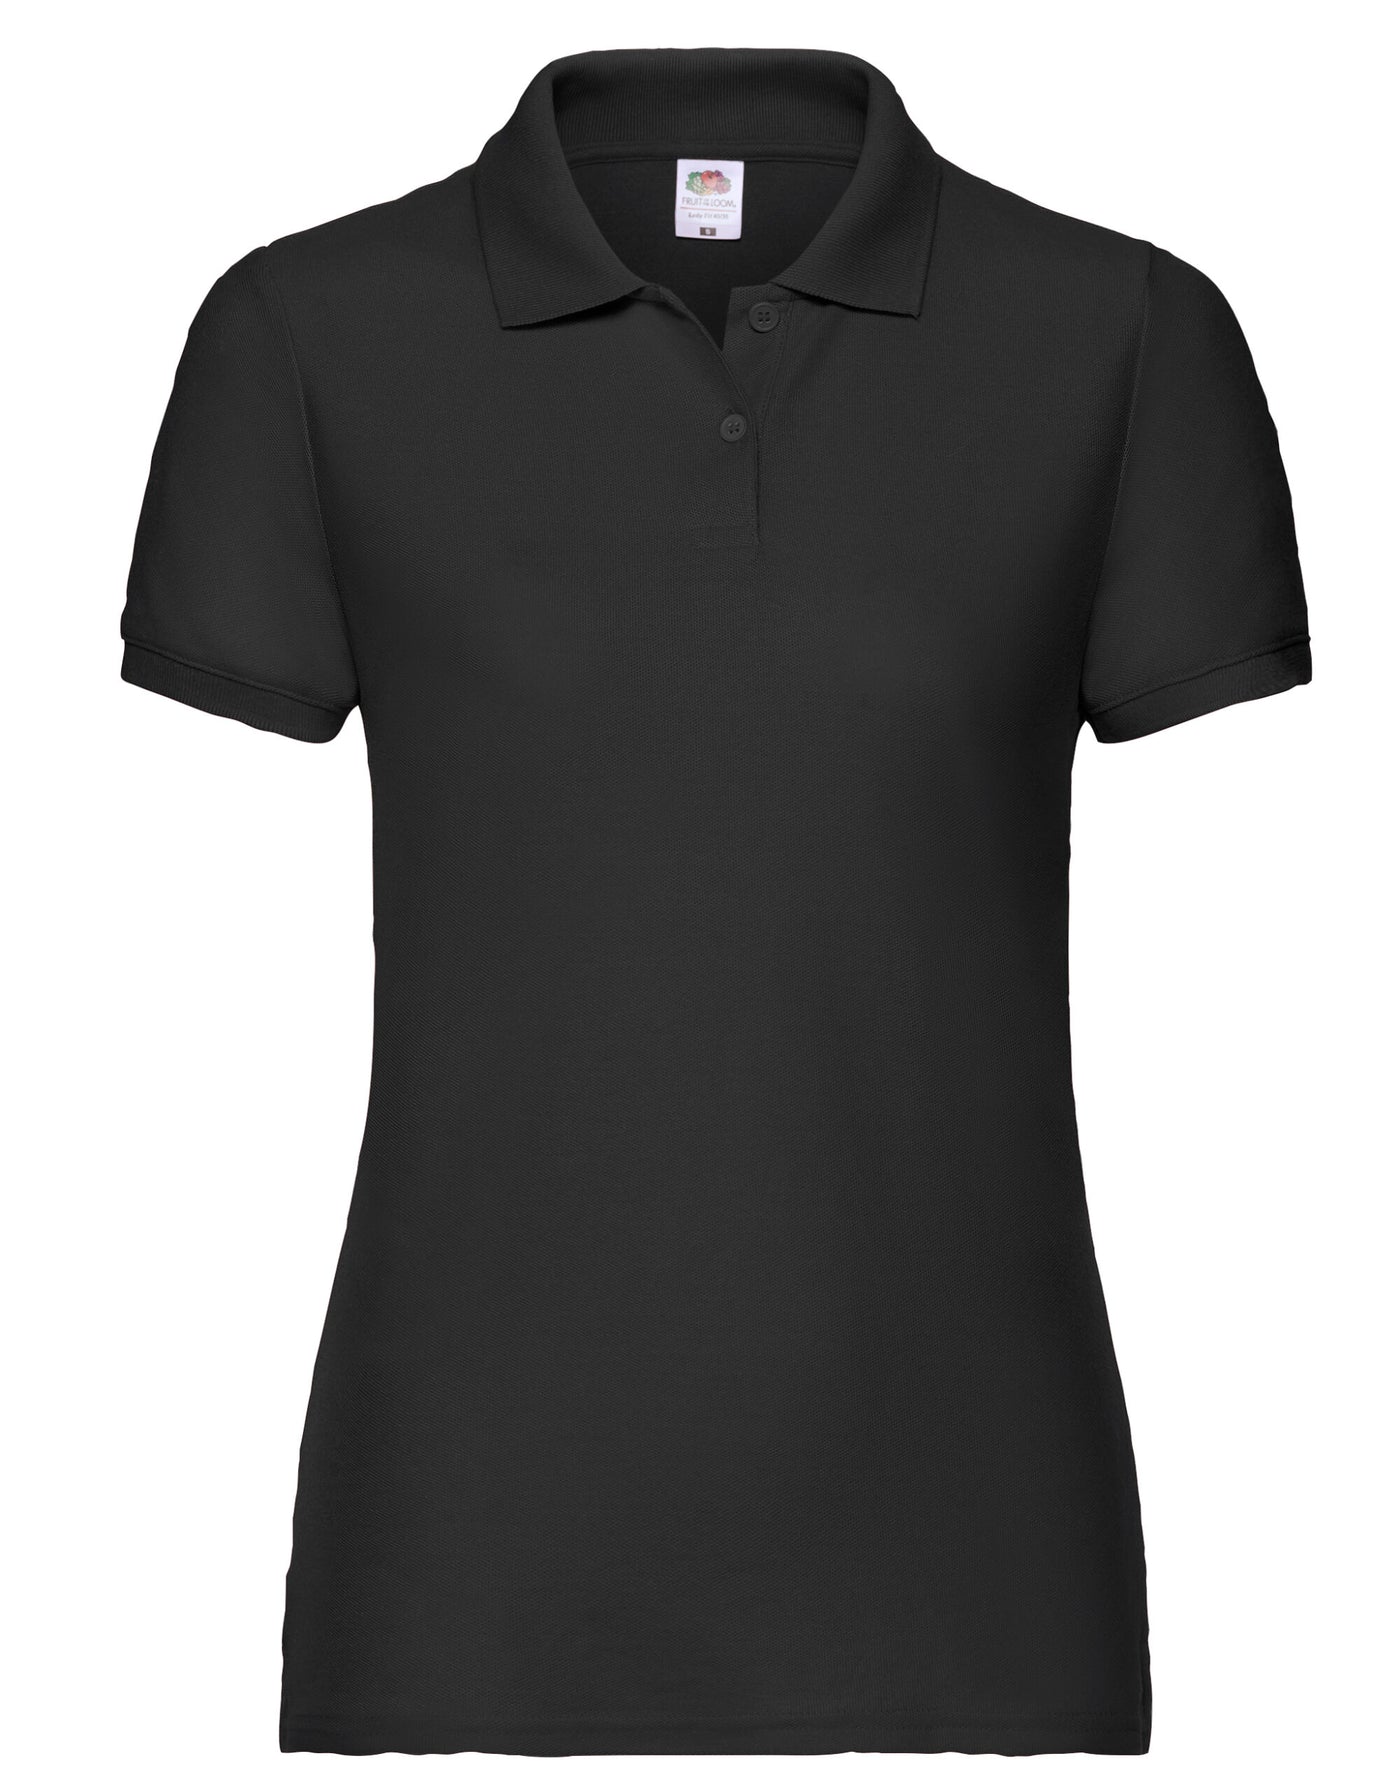 Ladies Fit Polo Shirt In Black